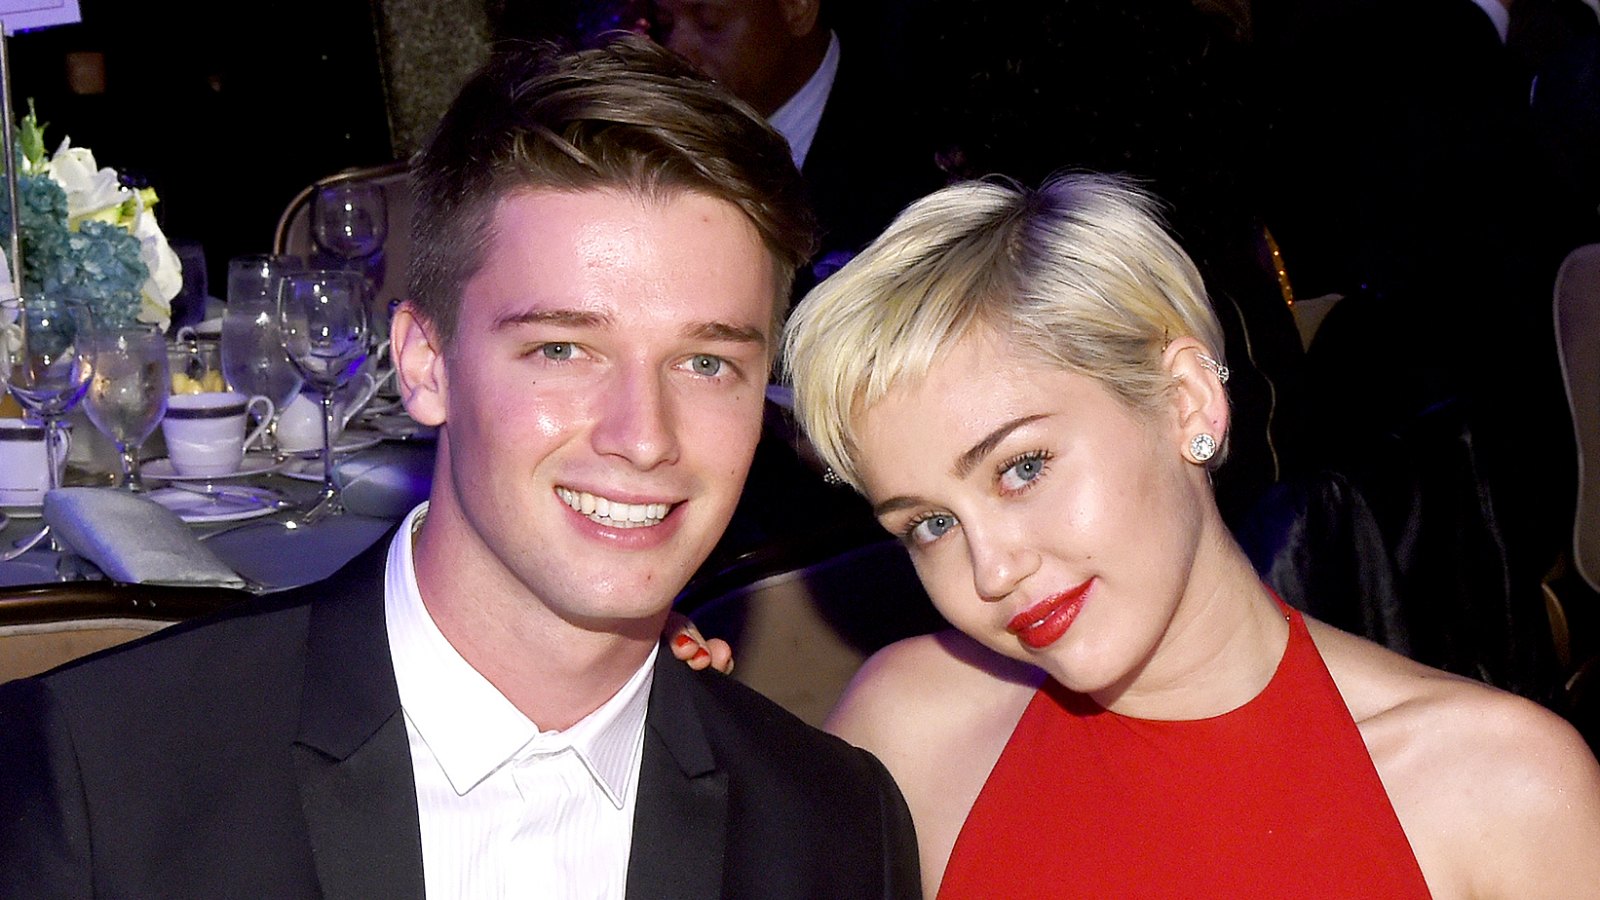 Patrick-Schwarzenegger-Went-to-Easter-High-During-Miley-Relationship